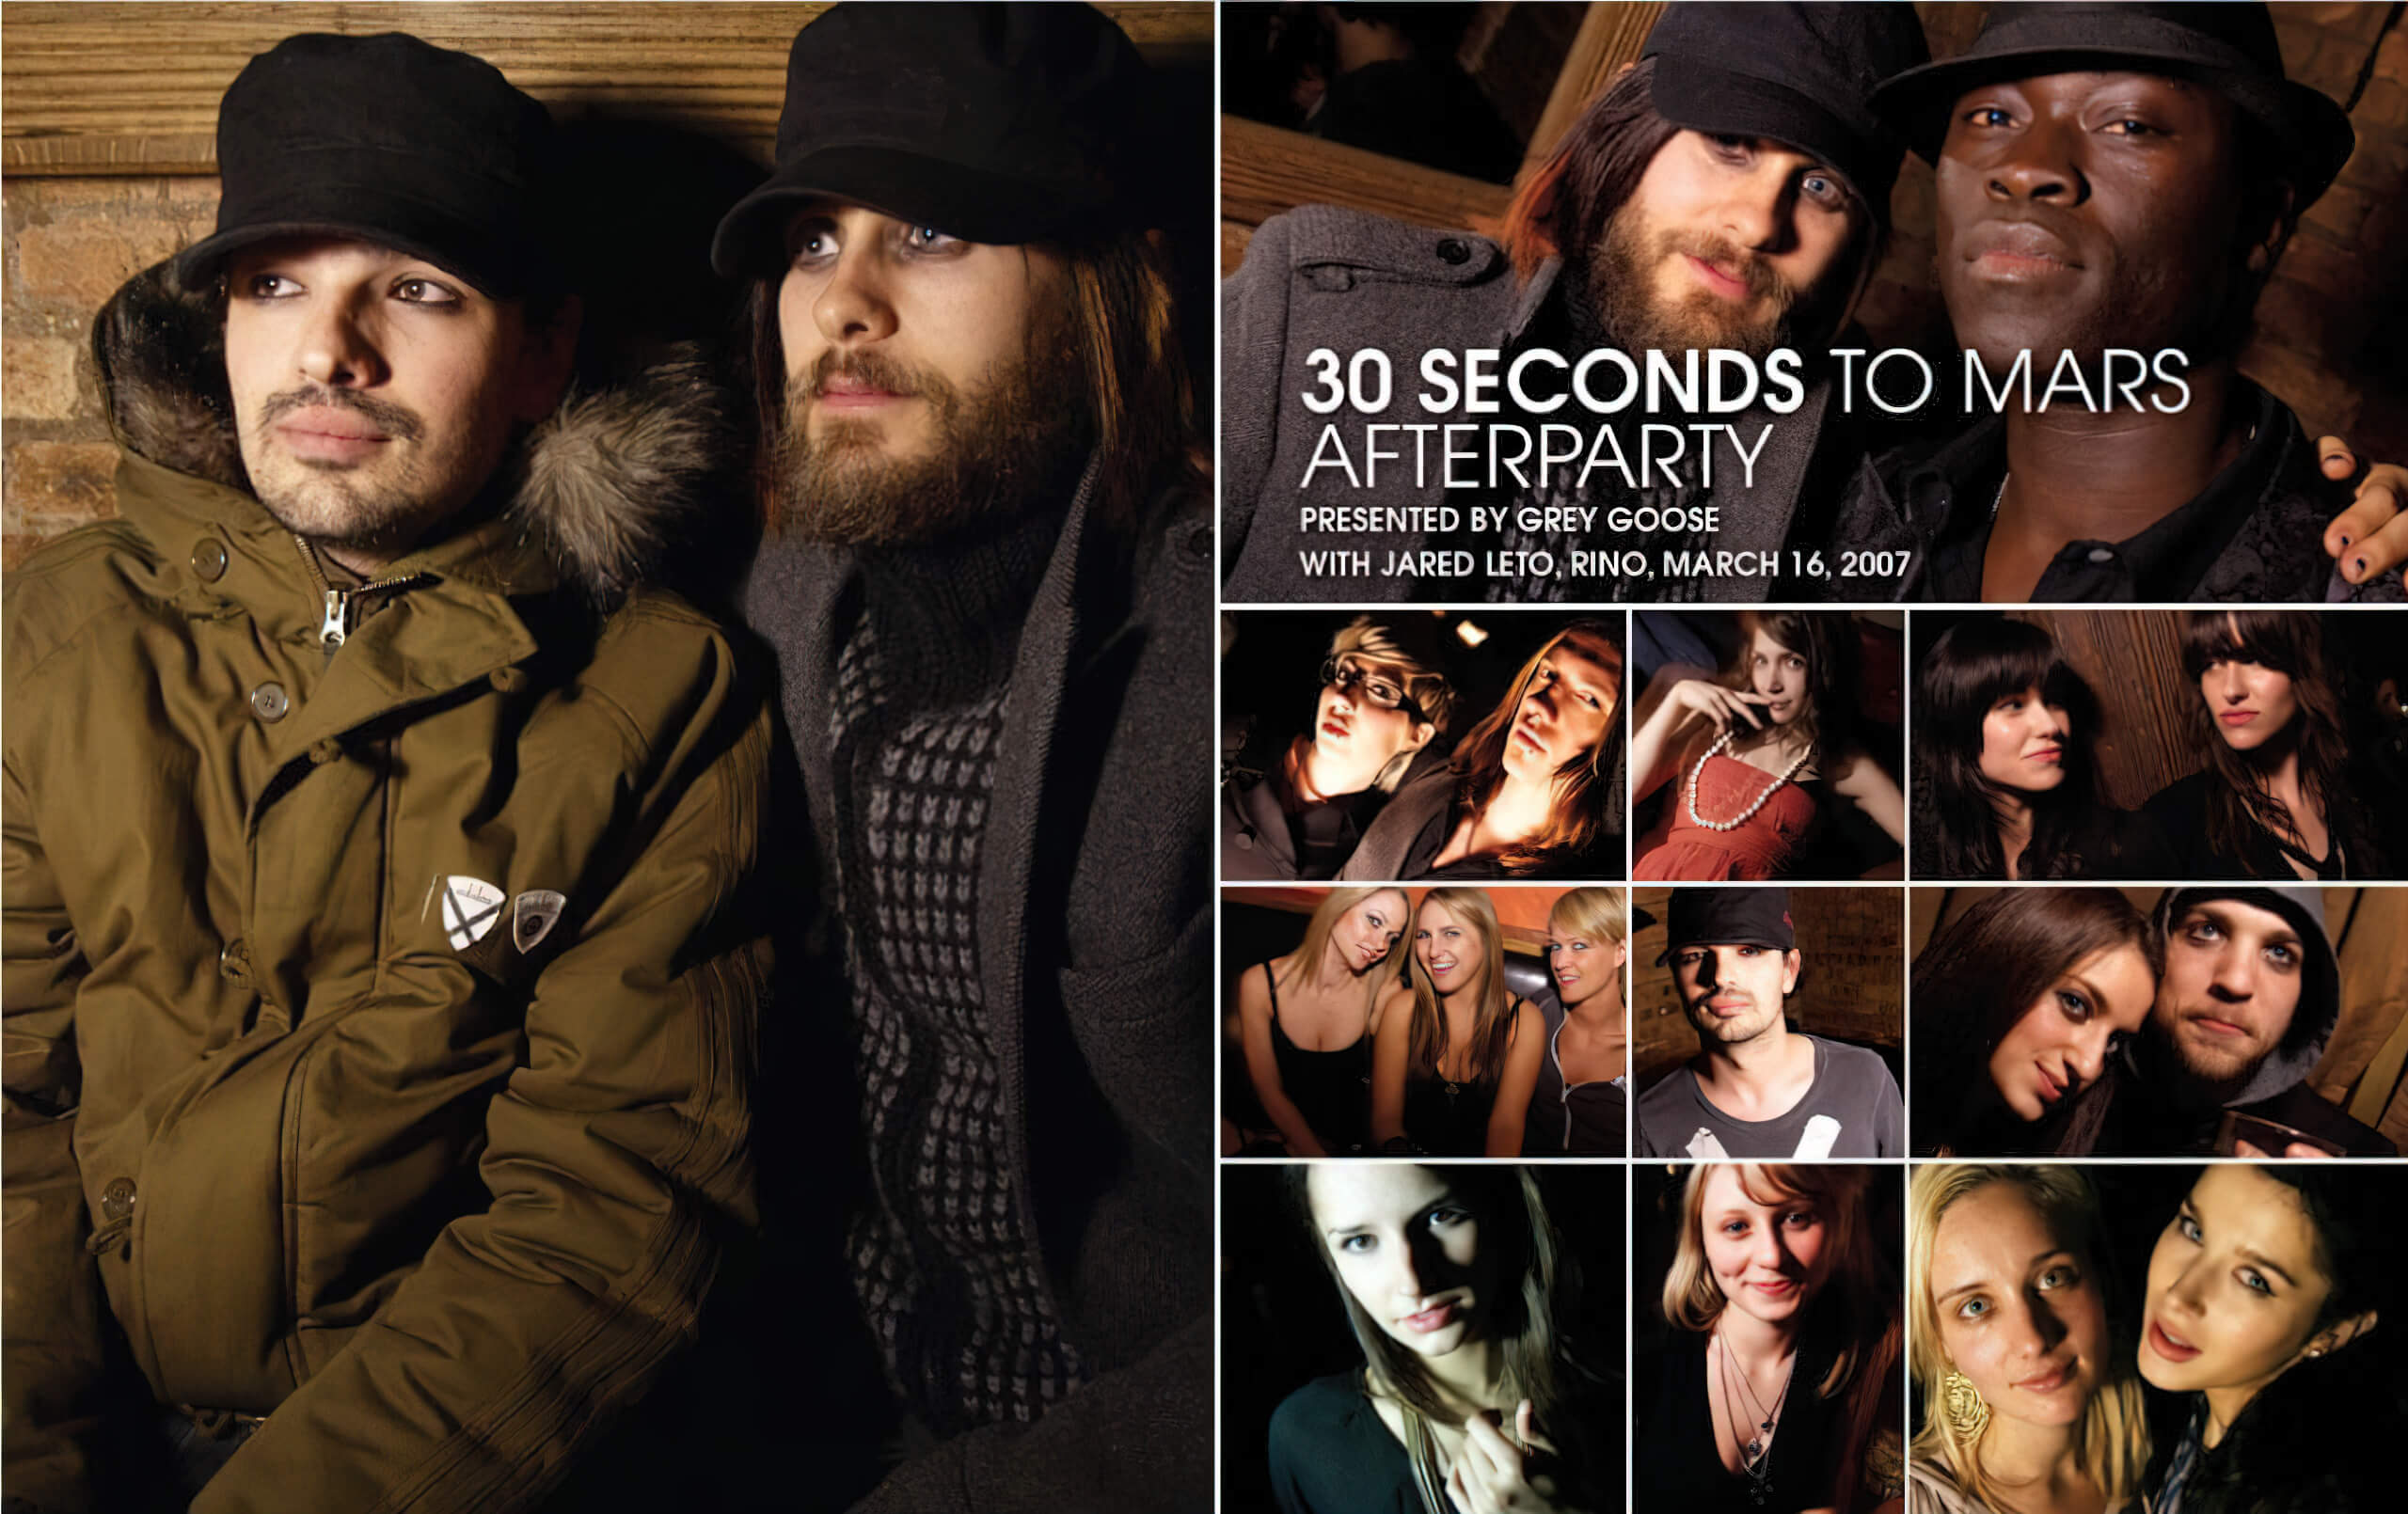 30 Seconds to Mars Afterparty hosted by Jared Leto